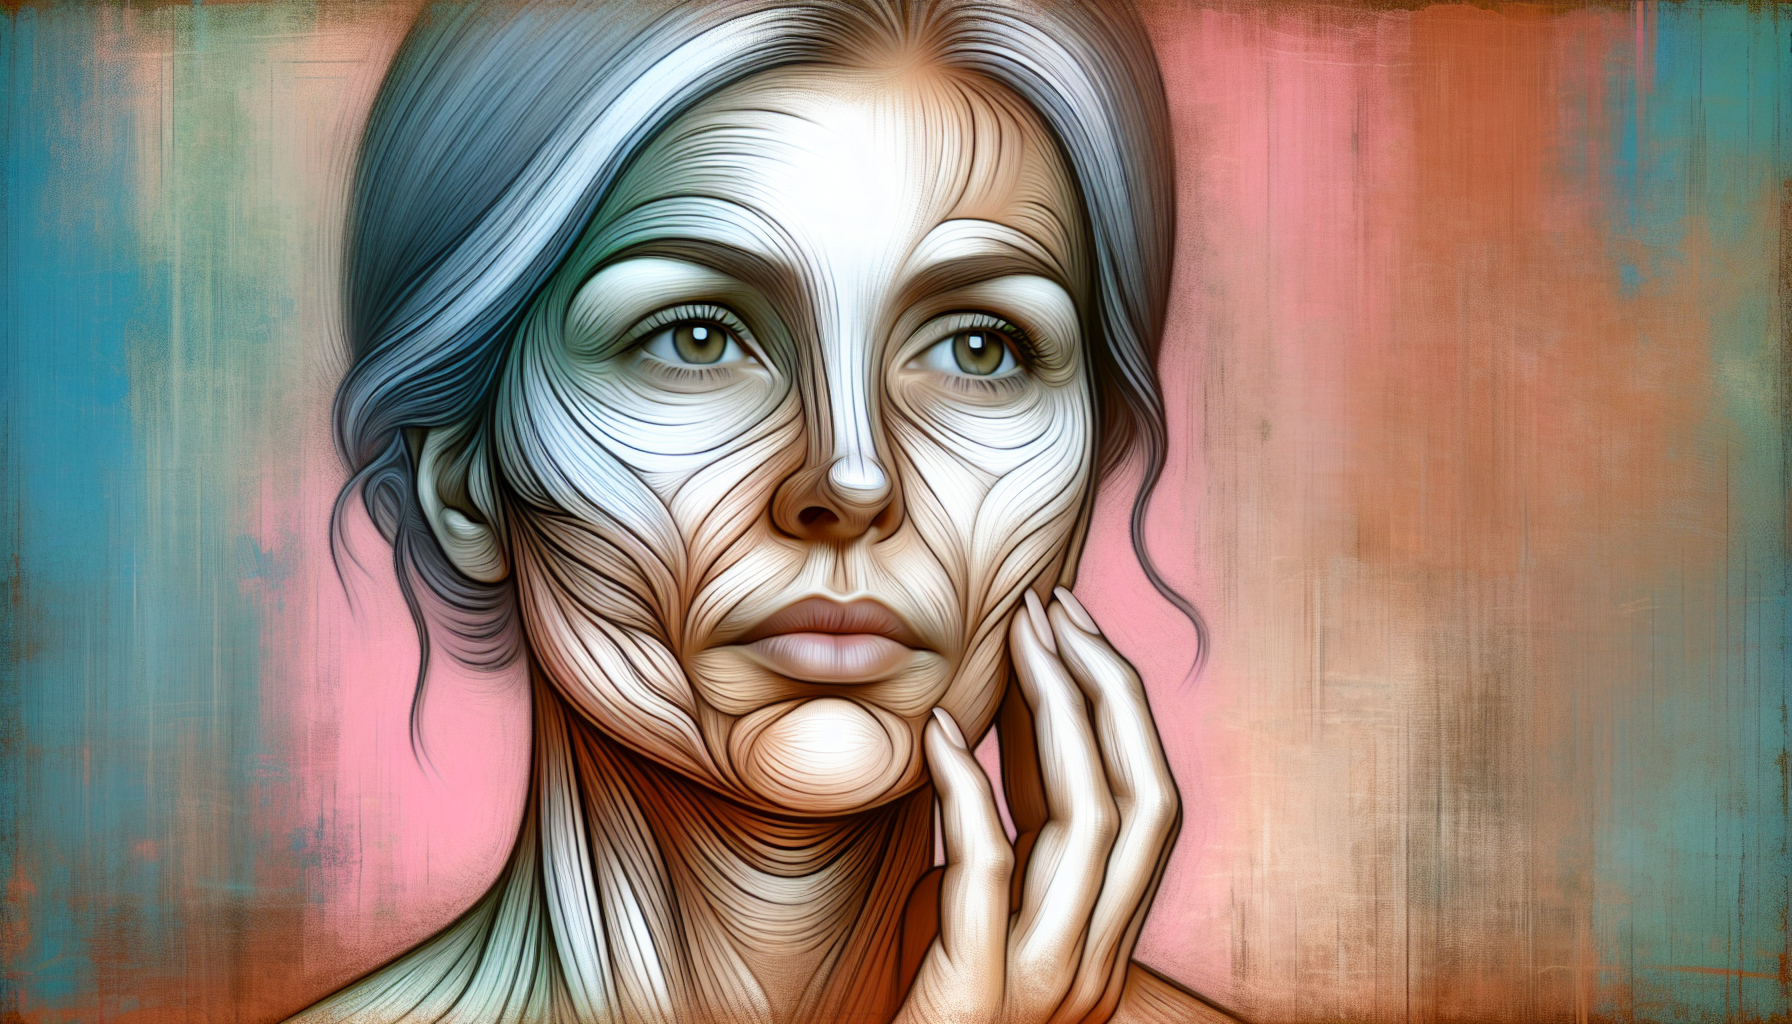 Illustration of skin aging due to collagen loss